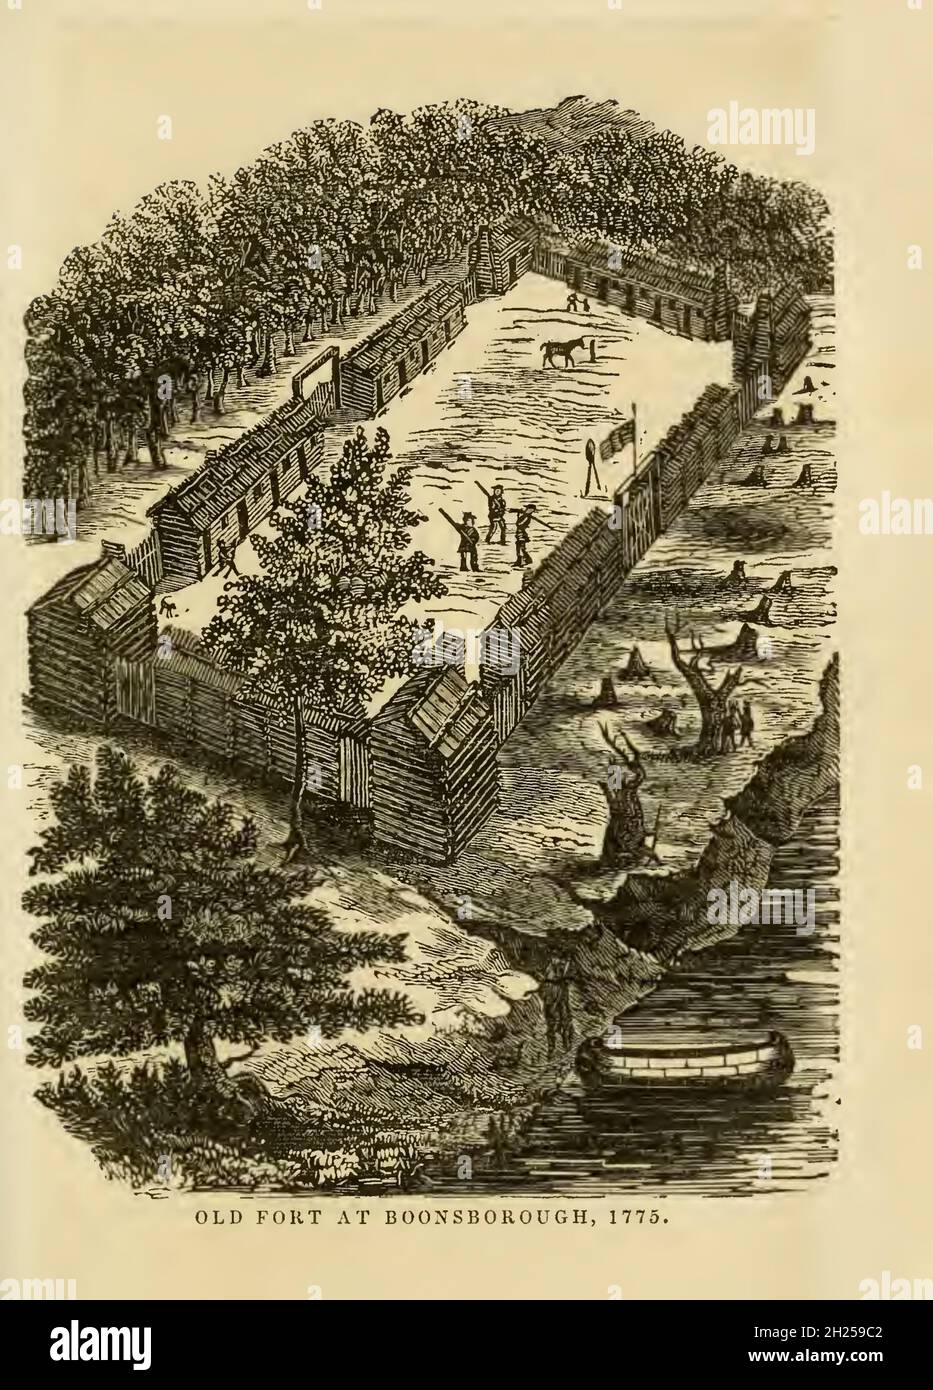 Old Fort at Boonsborough [Boonesborough], 1775 from the book ' Historical Sketches Of Kentucky (1847) ' ITS HISTORY, ANTIQUITIES, AND NATURAL CURIOSITIES, GEOGRAPHICAL, STATISTICAL, AND GEOLOGICAL DESCRIPTIONS. WITH ANECDOTES OF PIONEER LIFE By Lewis Collins. Published by Lewis Collins, Maysville, KY. and J. A. & U. P. James Cincinnati. in 1847 Stock Photo